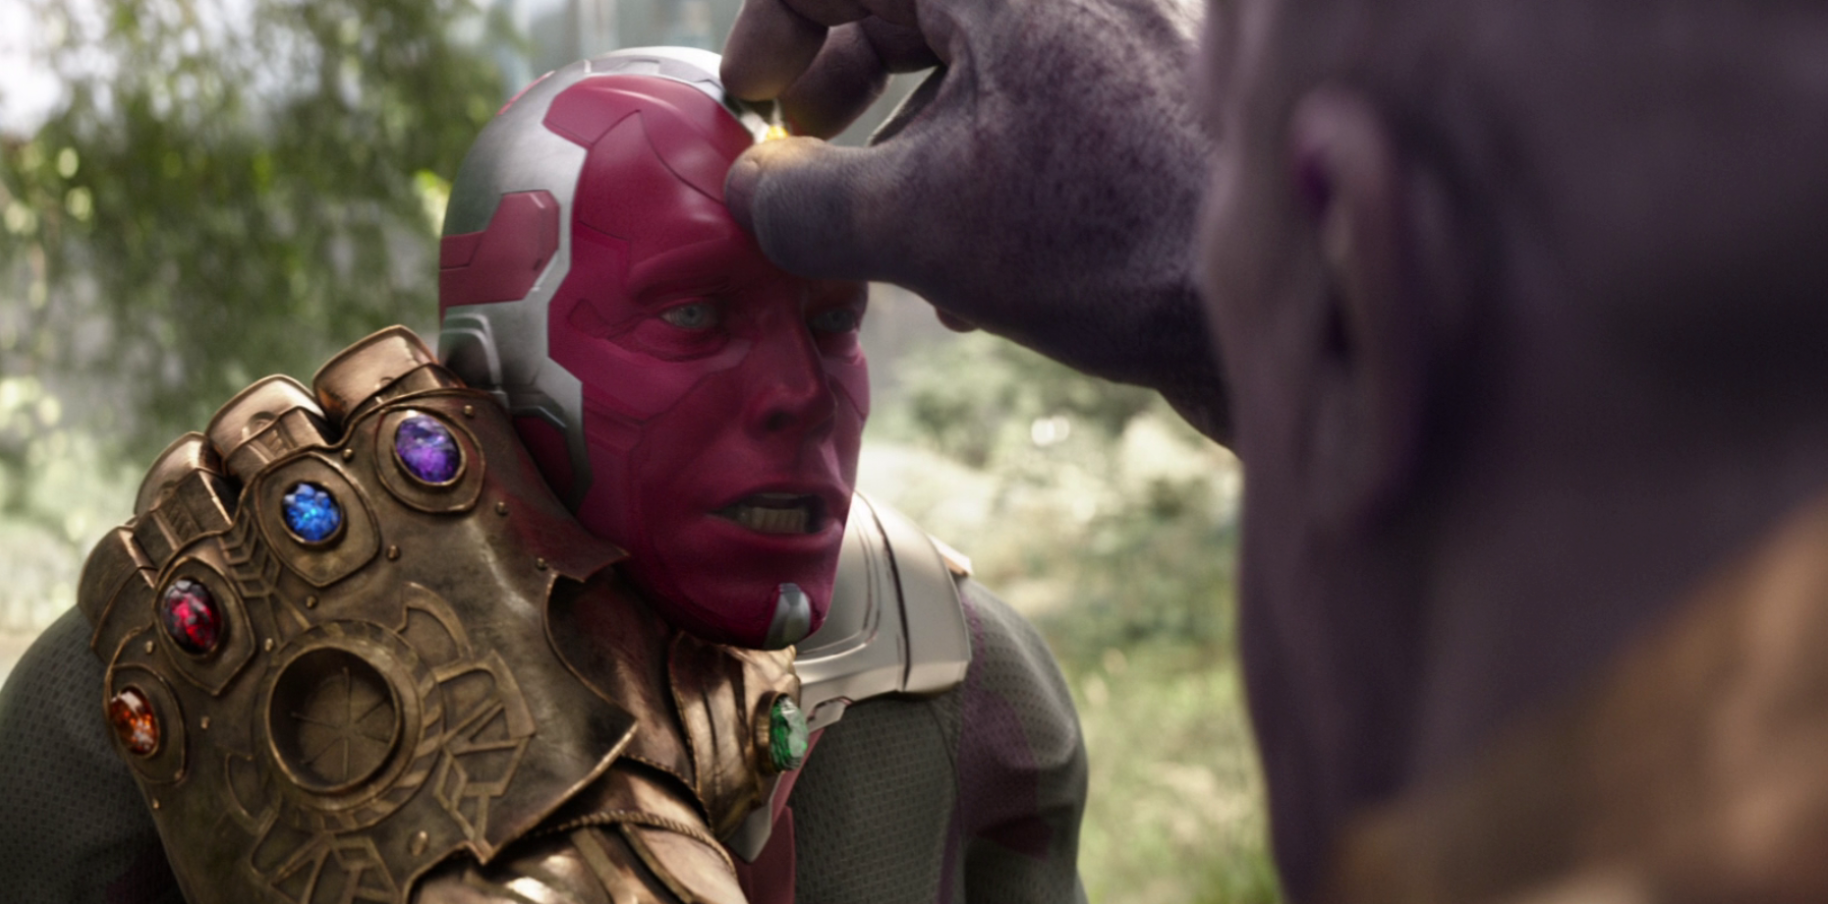 Thanos ripping the Mind Stone from Vision in Infinity War